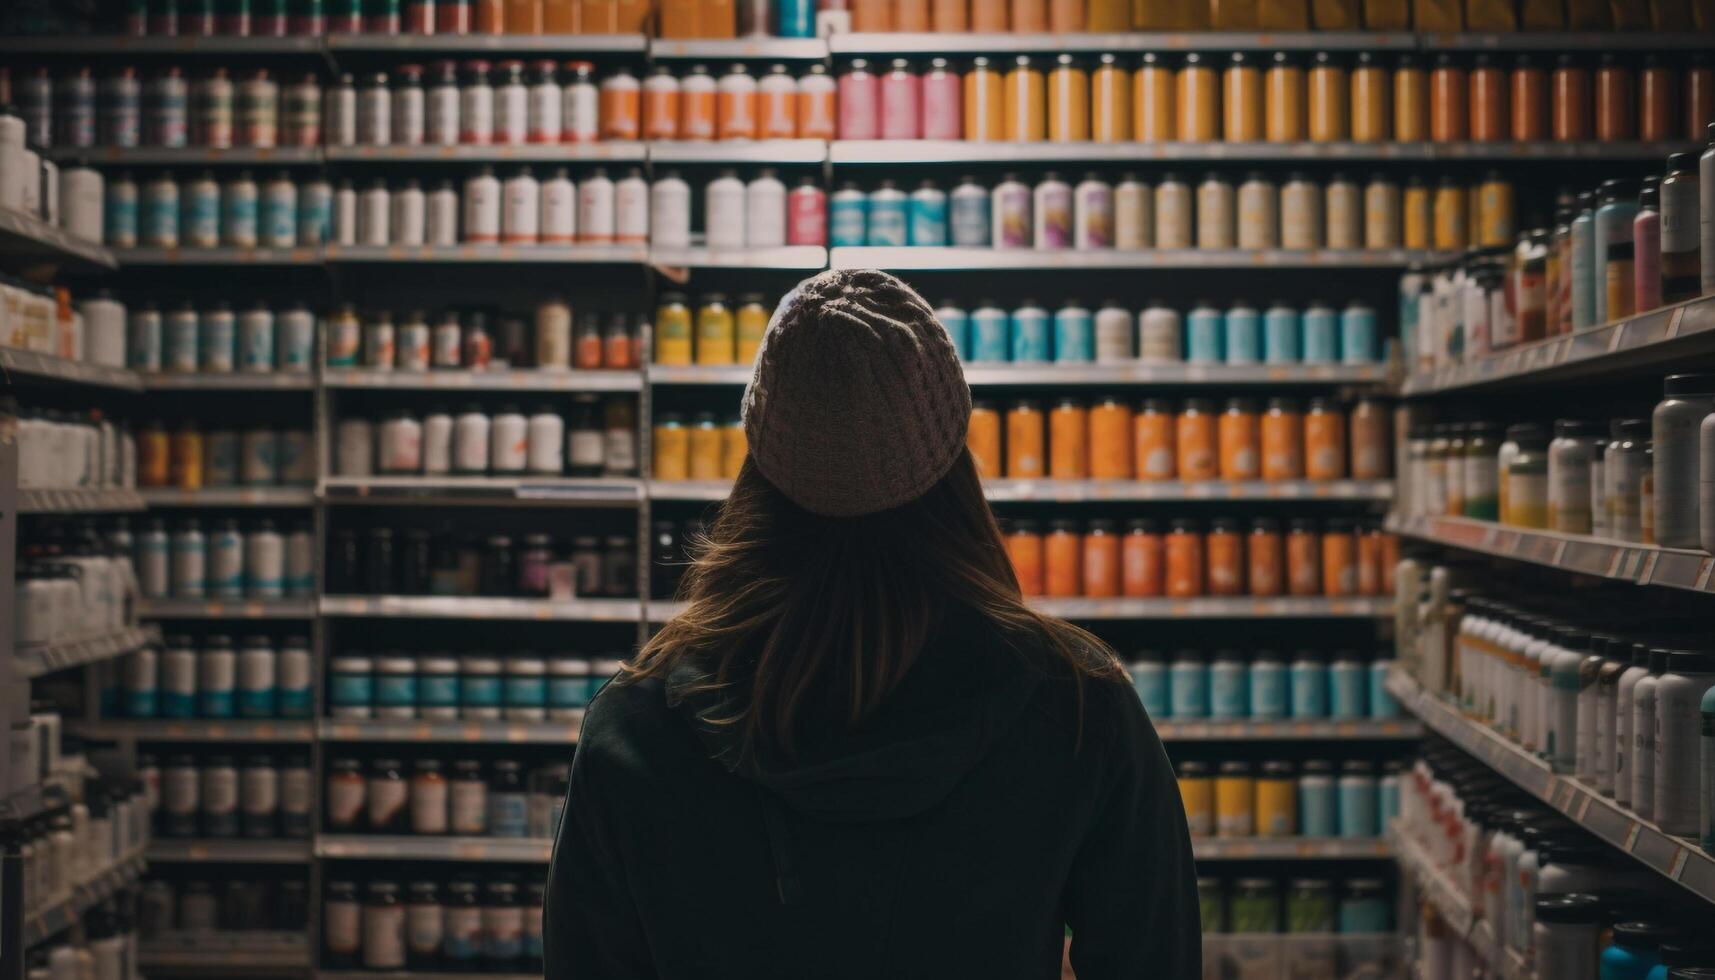 One woman holding a bottle, choosing from variety in store generated by AI photo